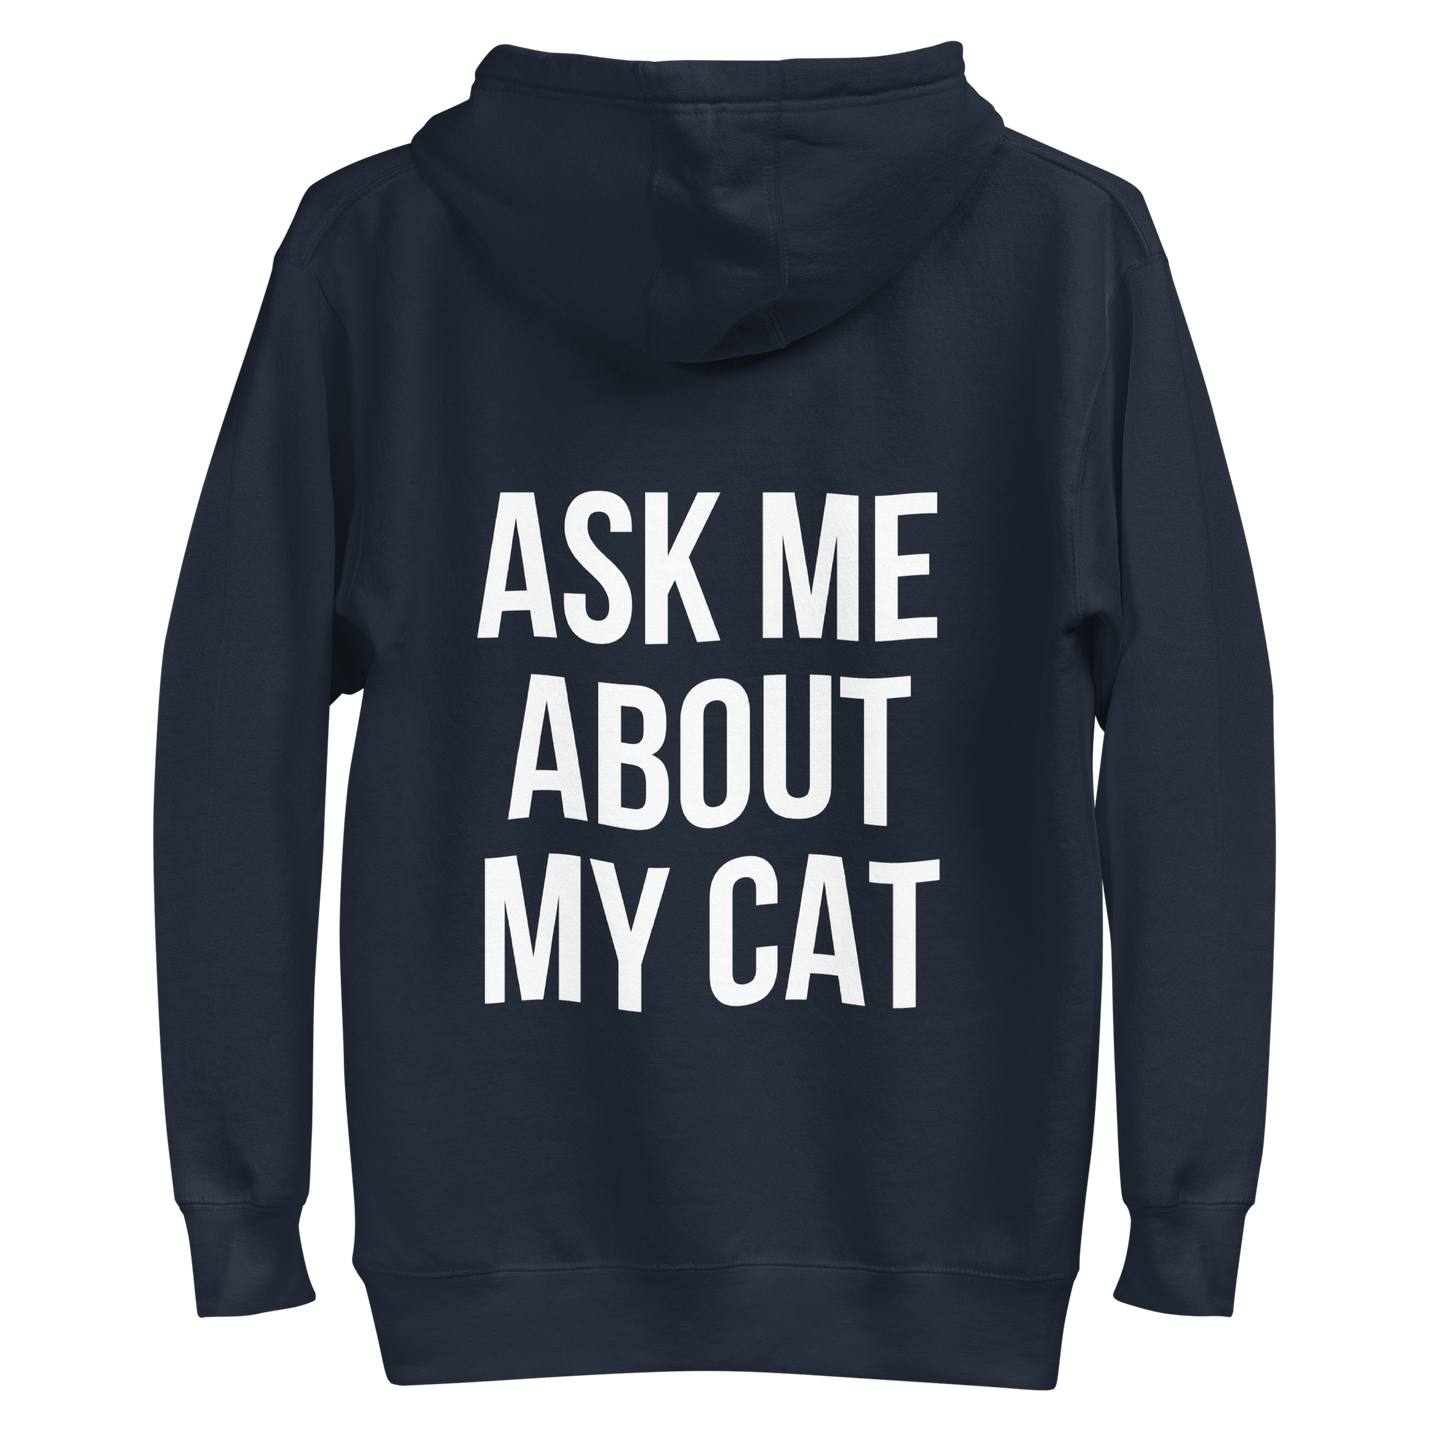 ask me about my cat - Unisex Premium Hoodie